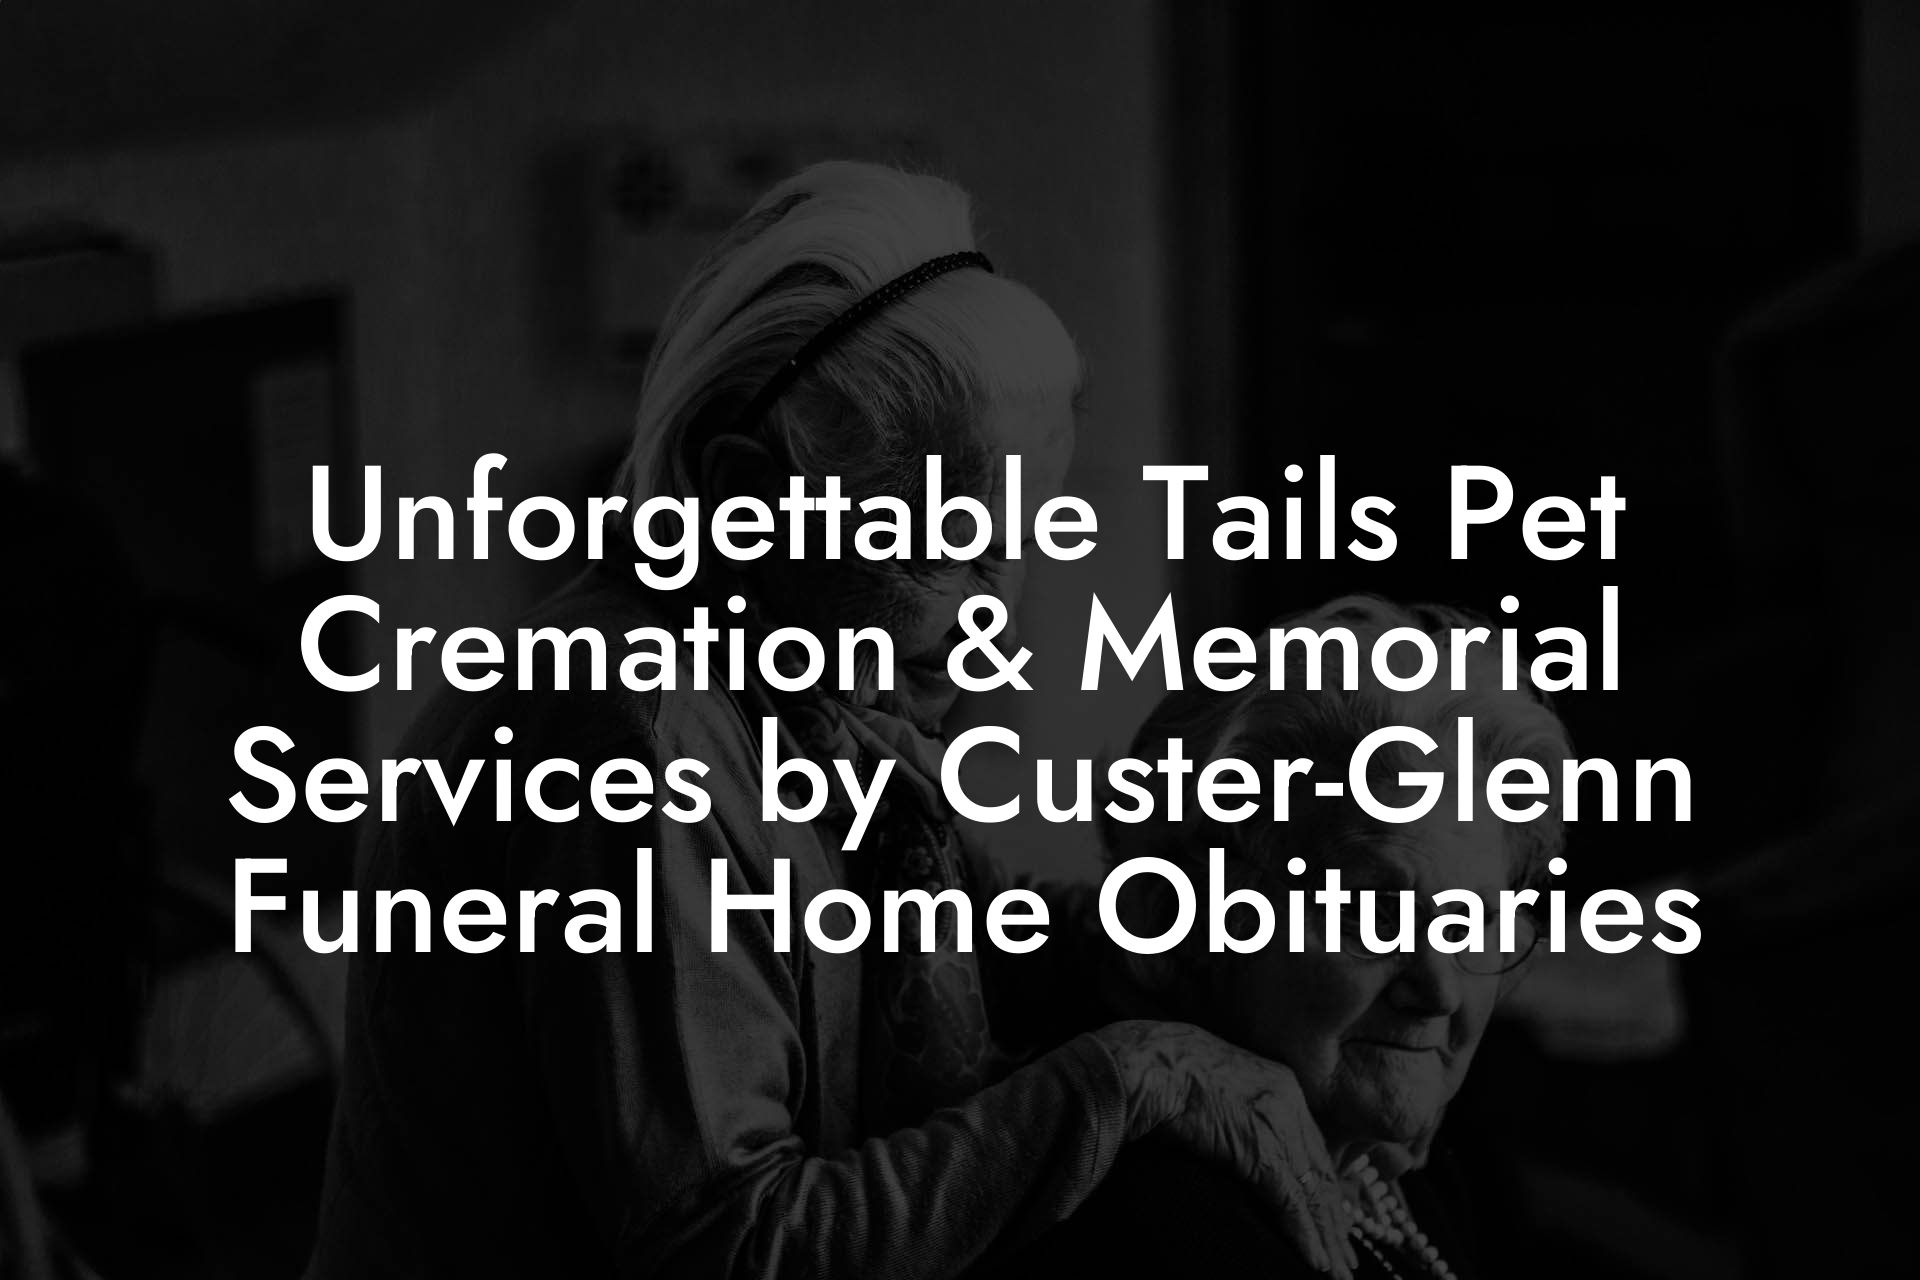 Unforgettable Tails Pet Cremation & Memorial Services by Custer-Glenn Funeral Home Obituaries